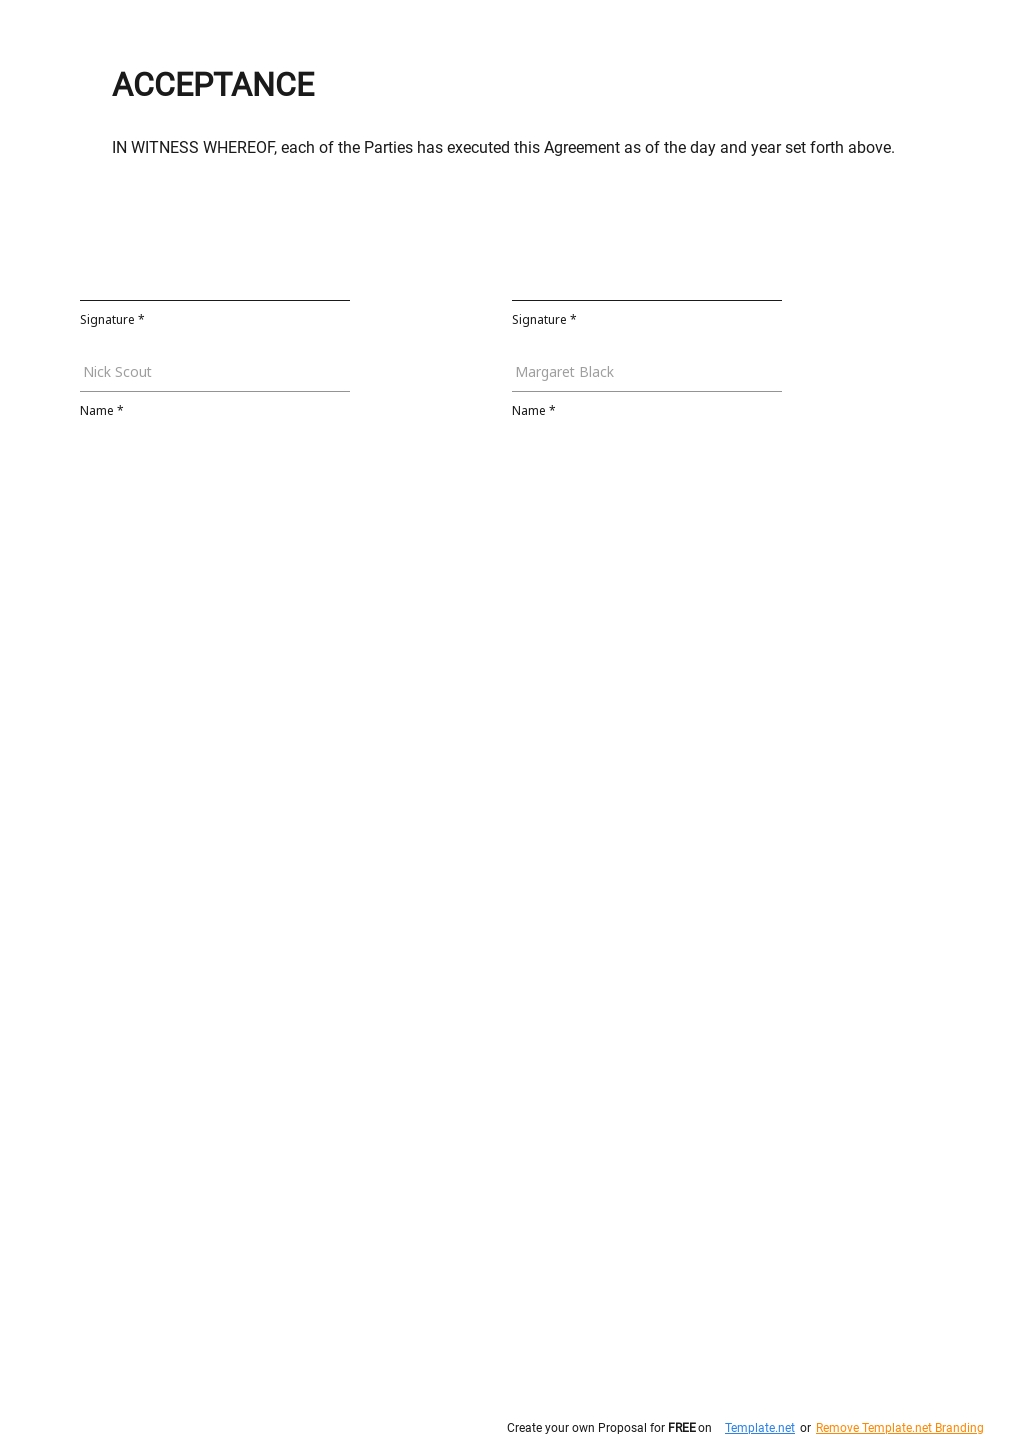 Bill Of Sale Asset Purchase Agreement Template 2.jpe